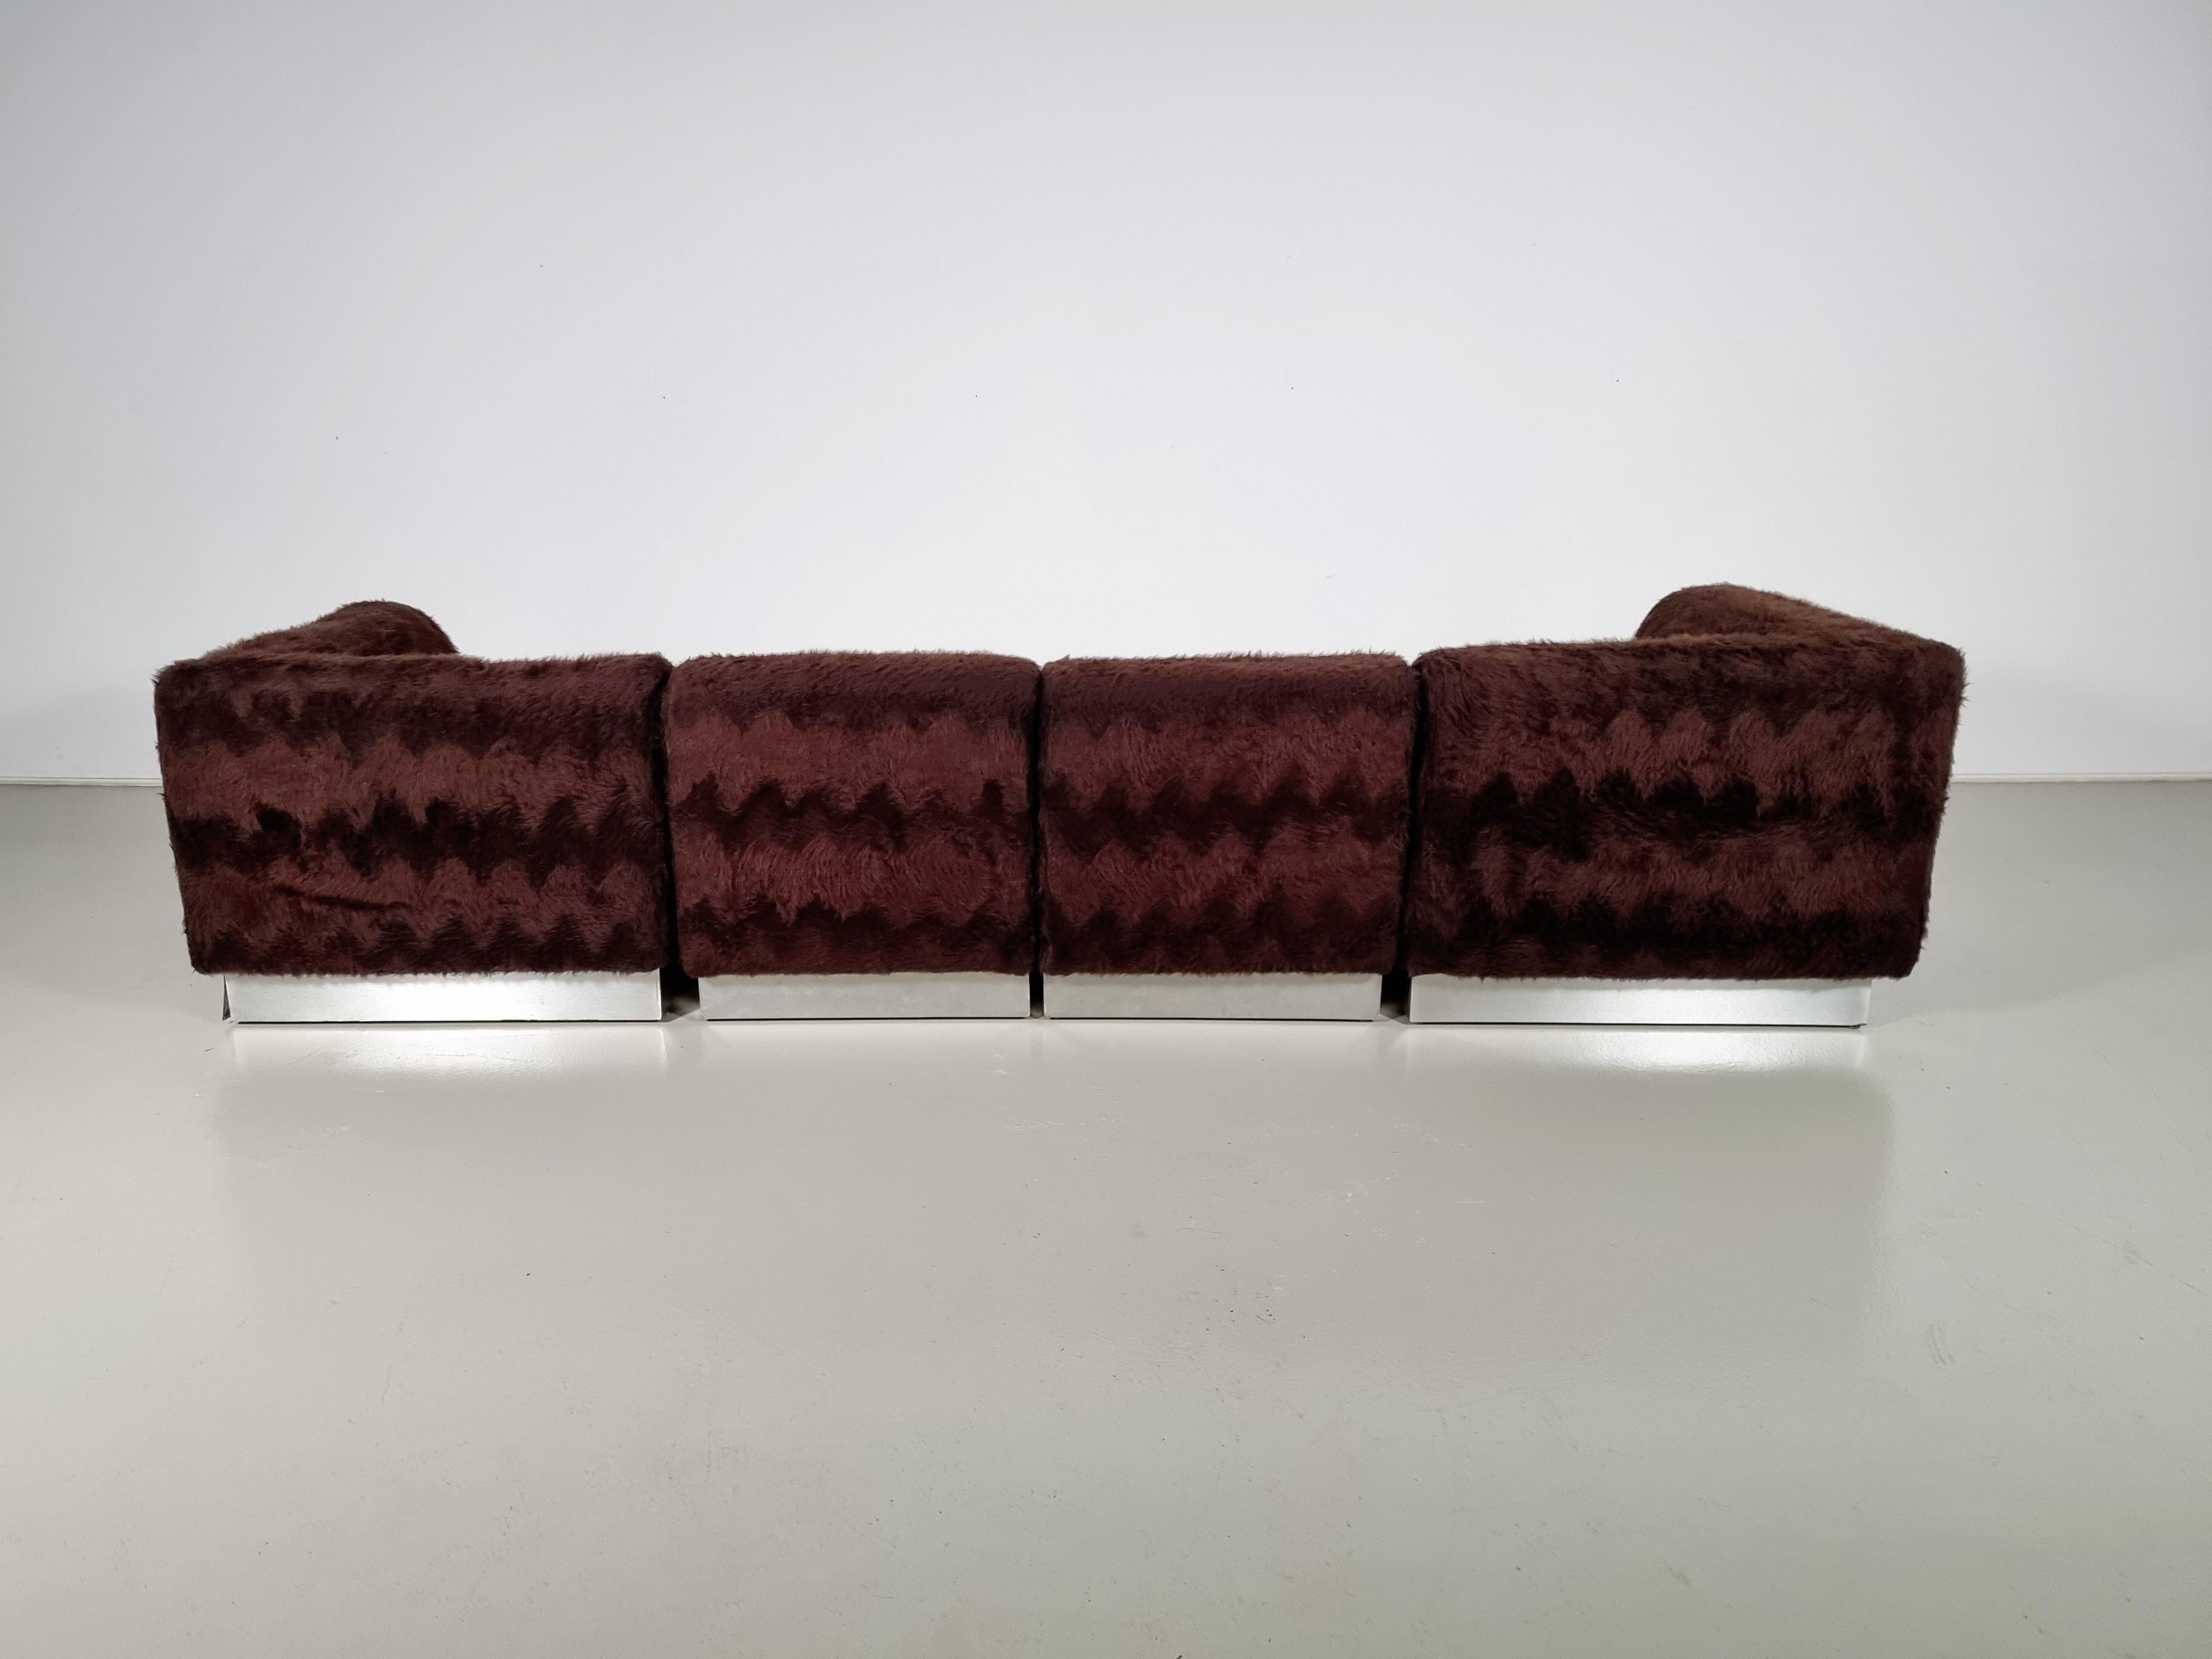 European Vintage Italian Chrome Plated Sectional Sofa with Faux Fur, 1970s For Sale